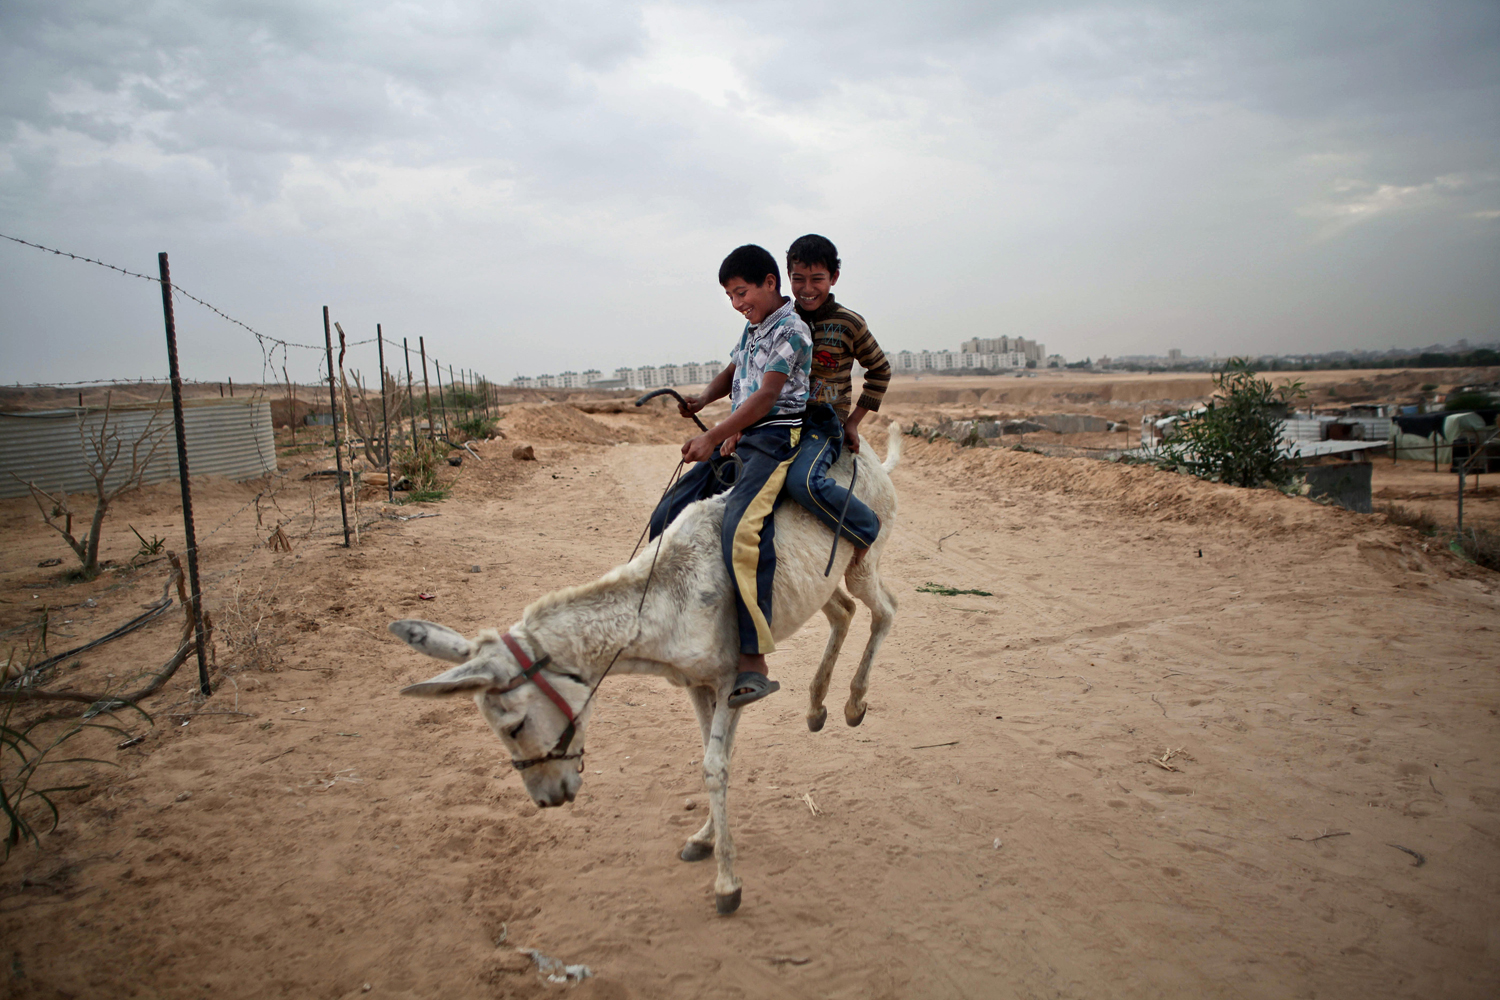 THE DAILY LIFE AT THE BEDOUIN VILLAGE IN GAZA STRIP